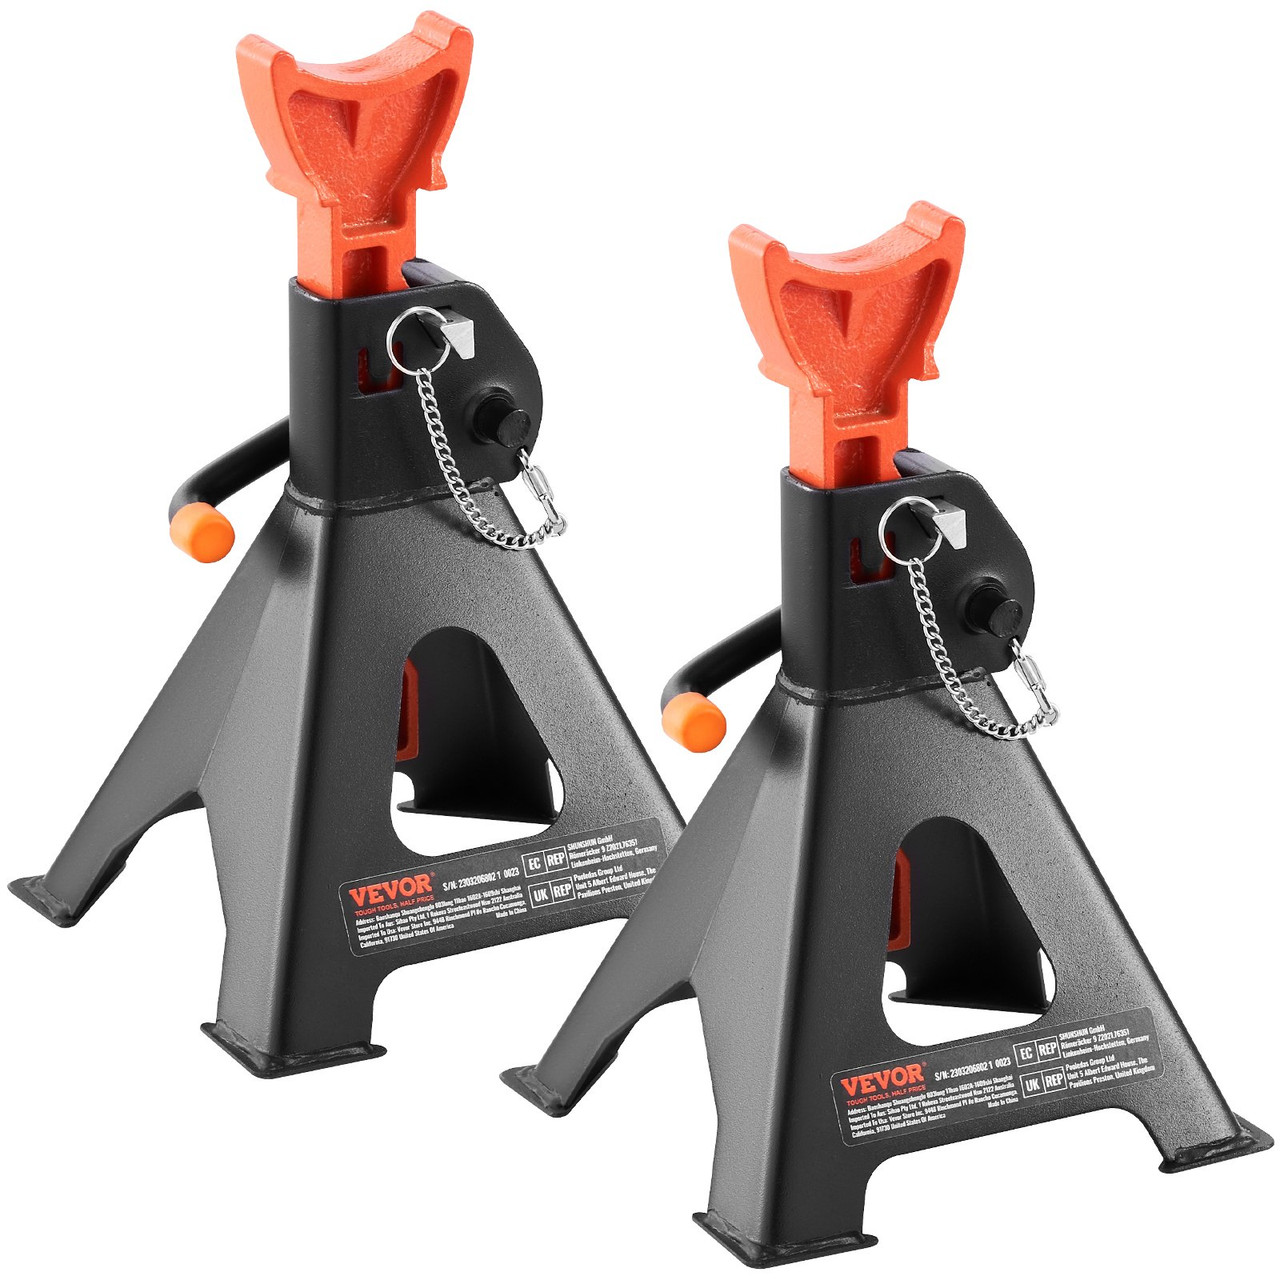 VEVOR Jack Stands, 3 Ton (6,000 lbs) Capacity Car Jack Stands Double Locking, 10.8-16.3 inch Adjustable Height, for lifting SUV, Pickup Truck, Car and UTV/ATV, Red, 1 Pair